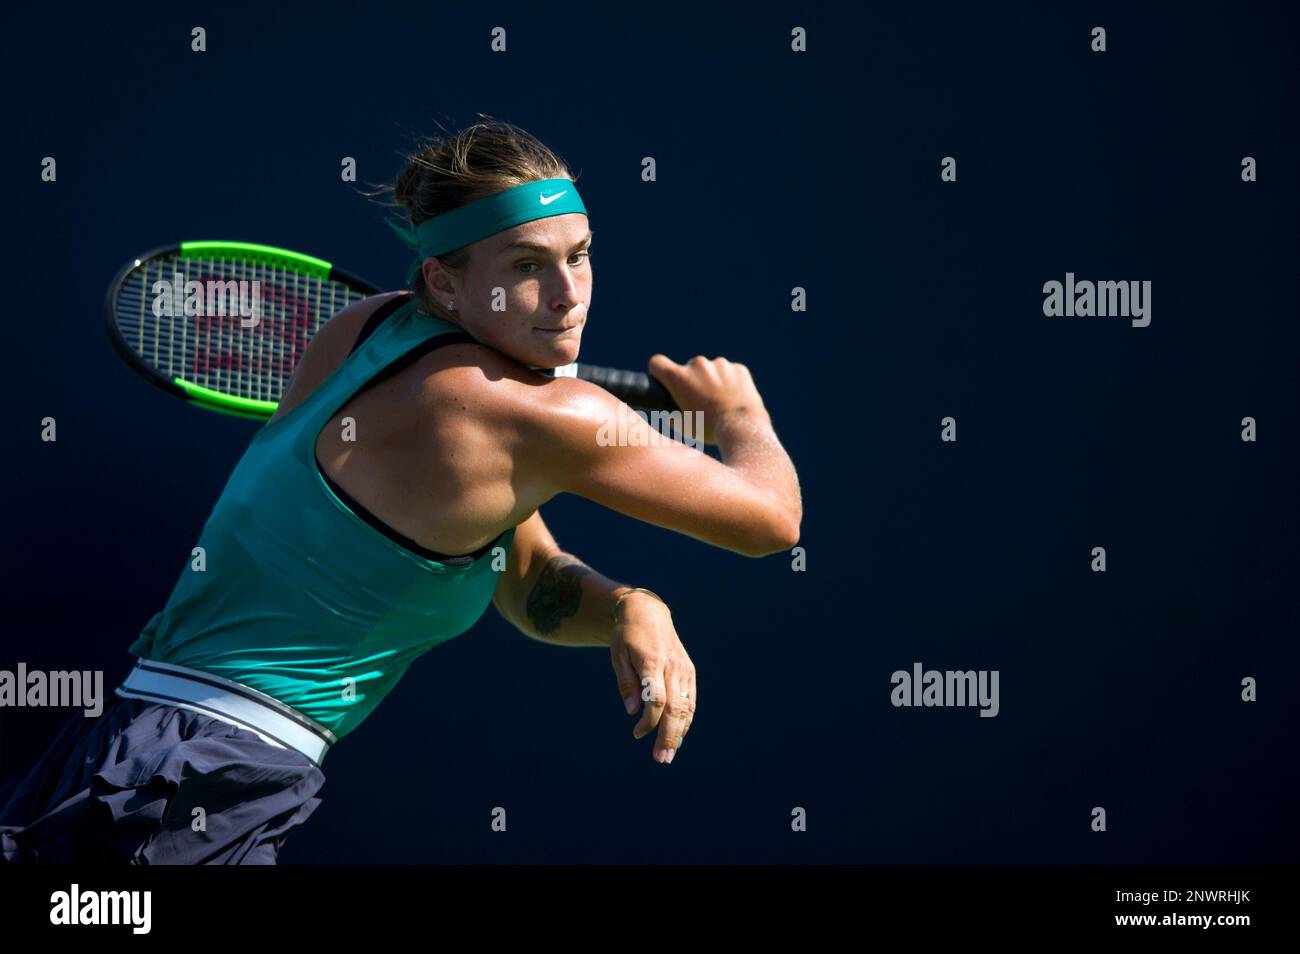 Aryna Sabalenka, of Belarus, hits a backhand against Julia Goerges, of  Germany, in the semifinals of the Connecticut Open tennis tournament in New  Haven, Conn., Friday, Aug. 24, 2018. (Michael Cummo/Hearst Connecticut